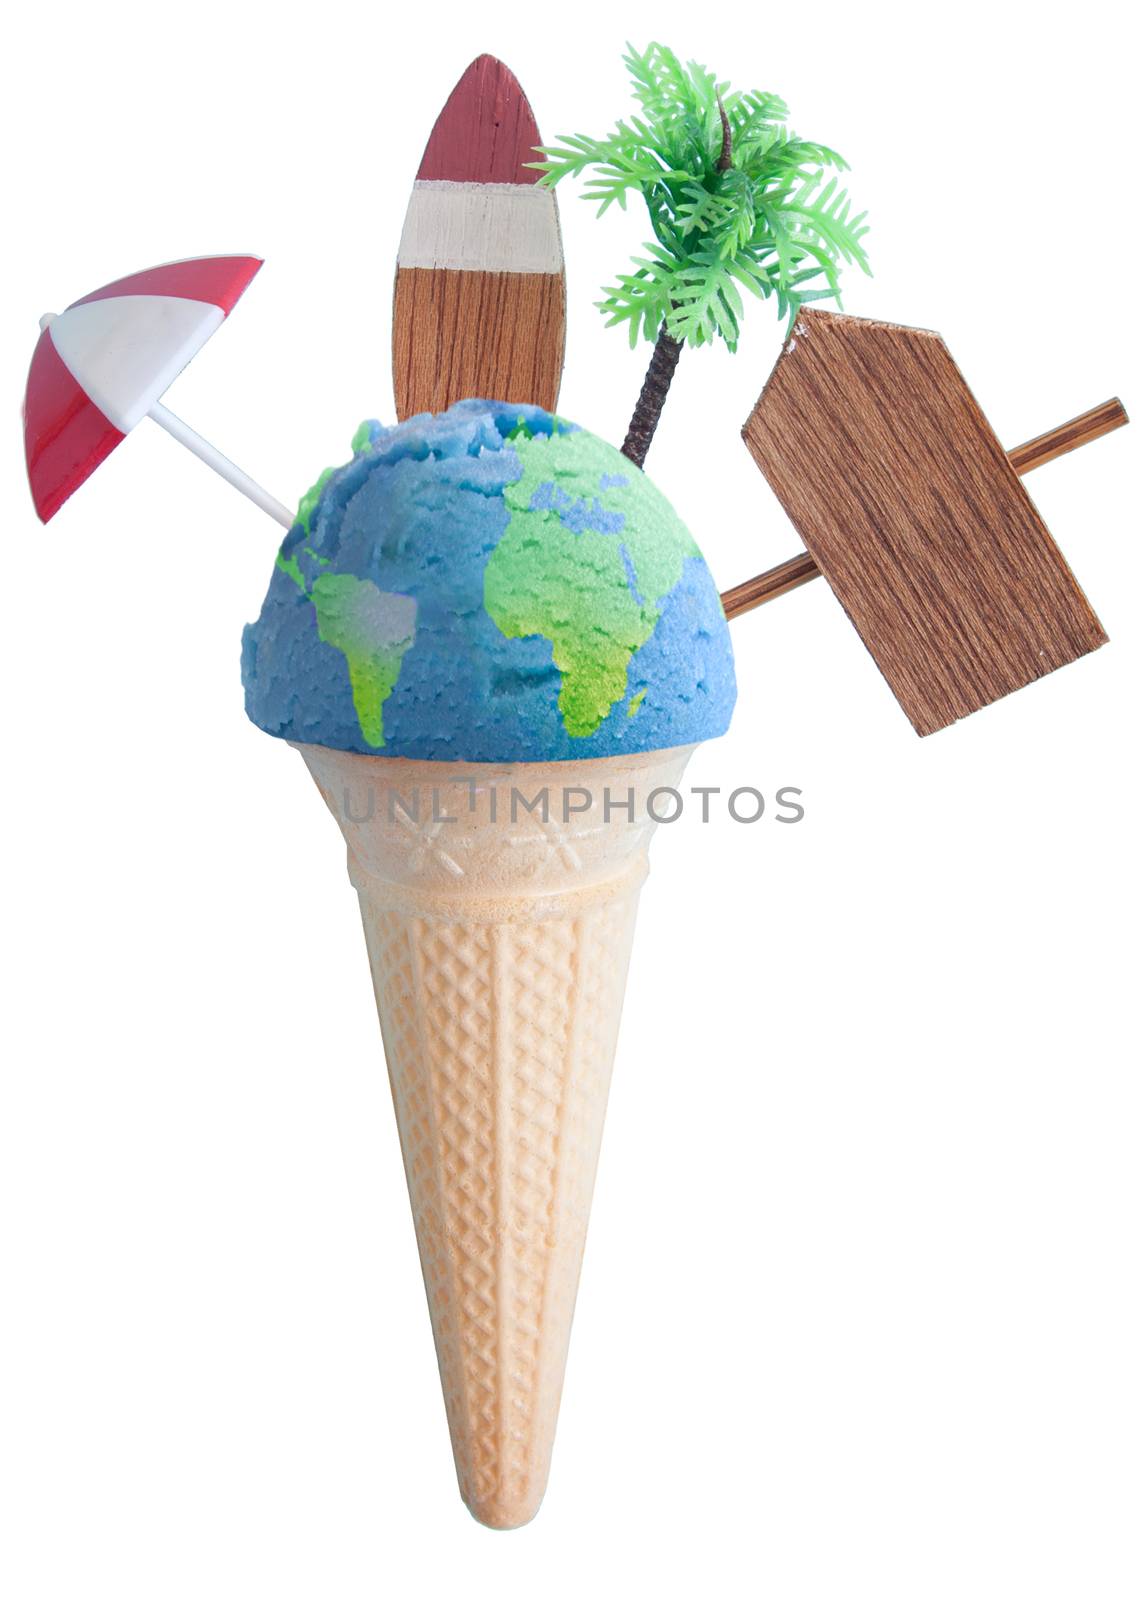 Ice cream cone with atlas map and vacation items including vacation painted on beach post, parasol and palm tree